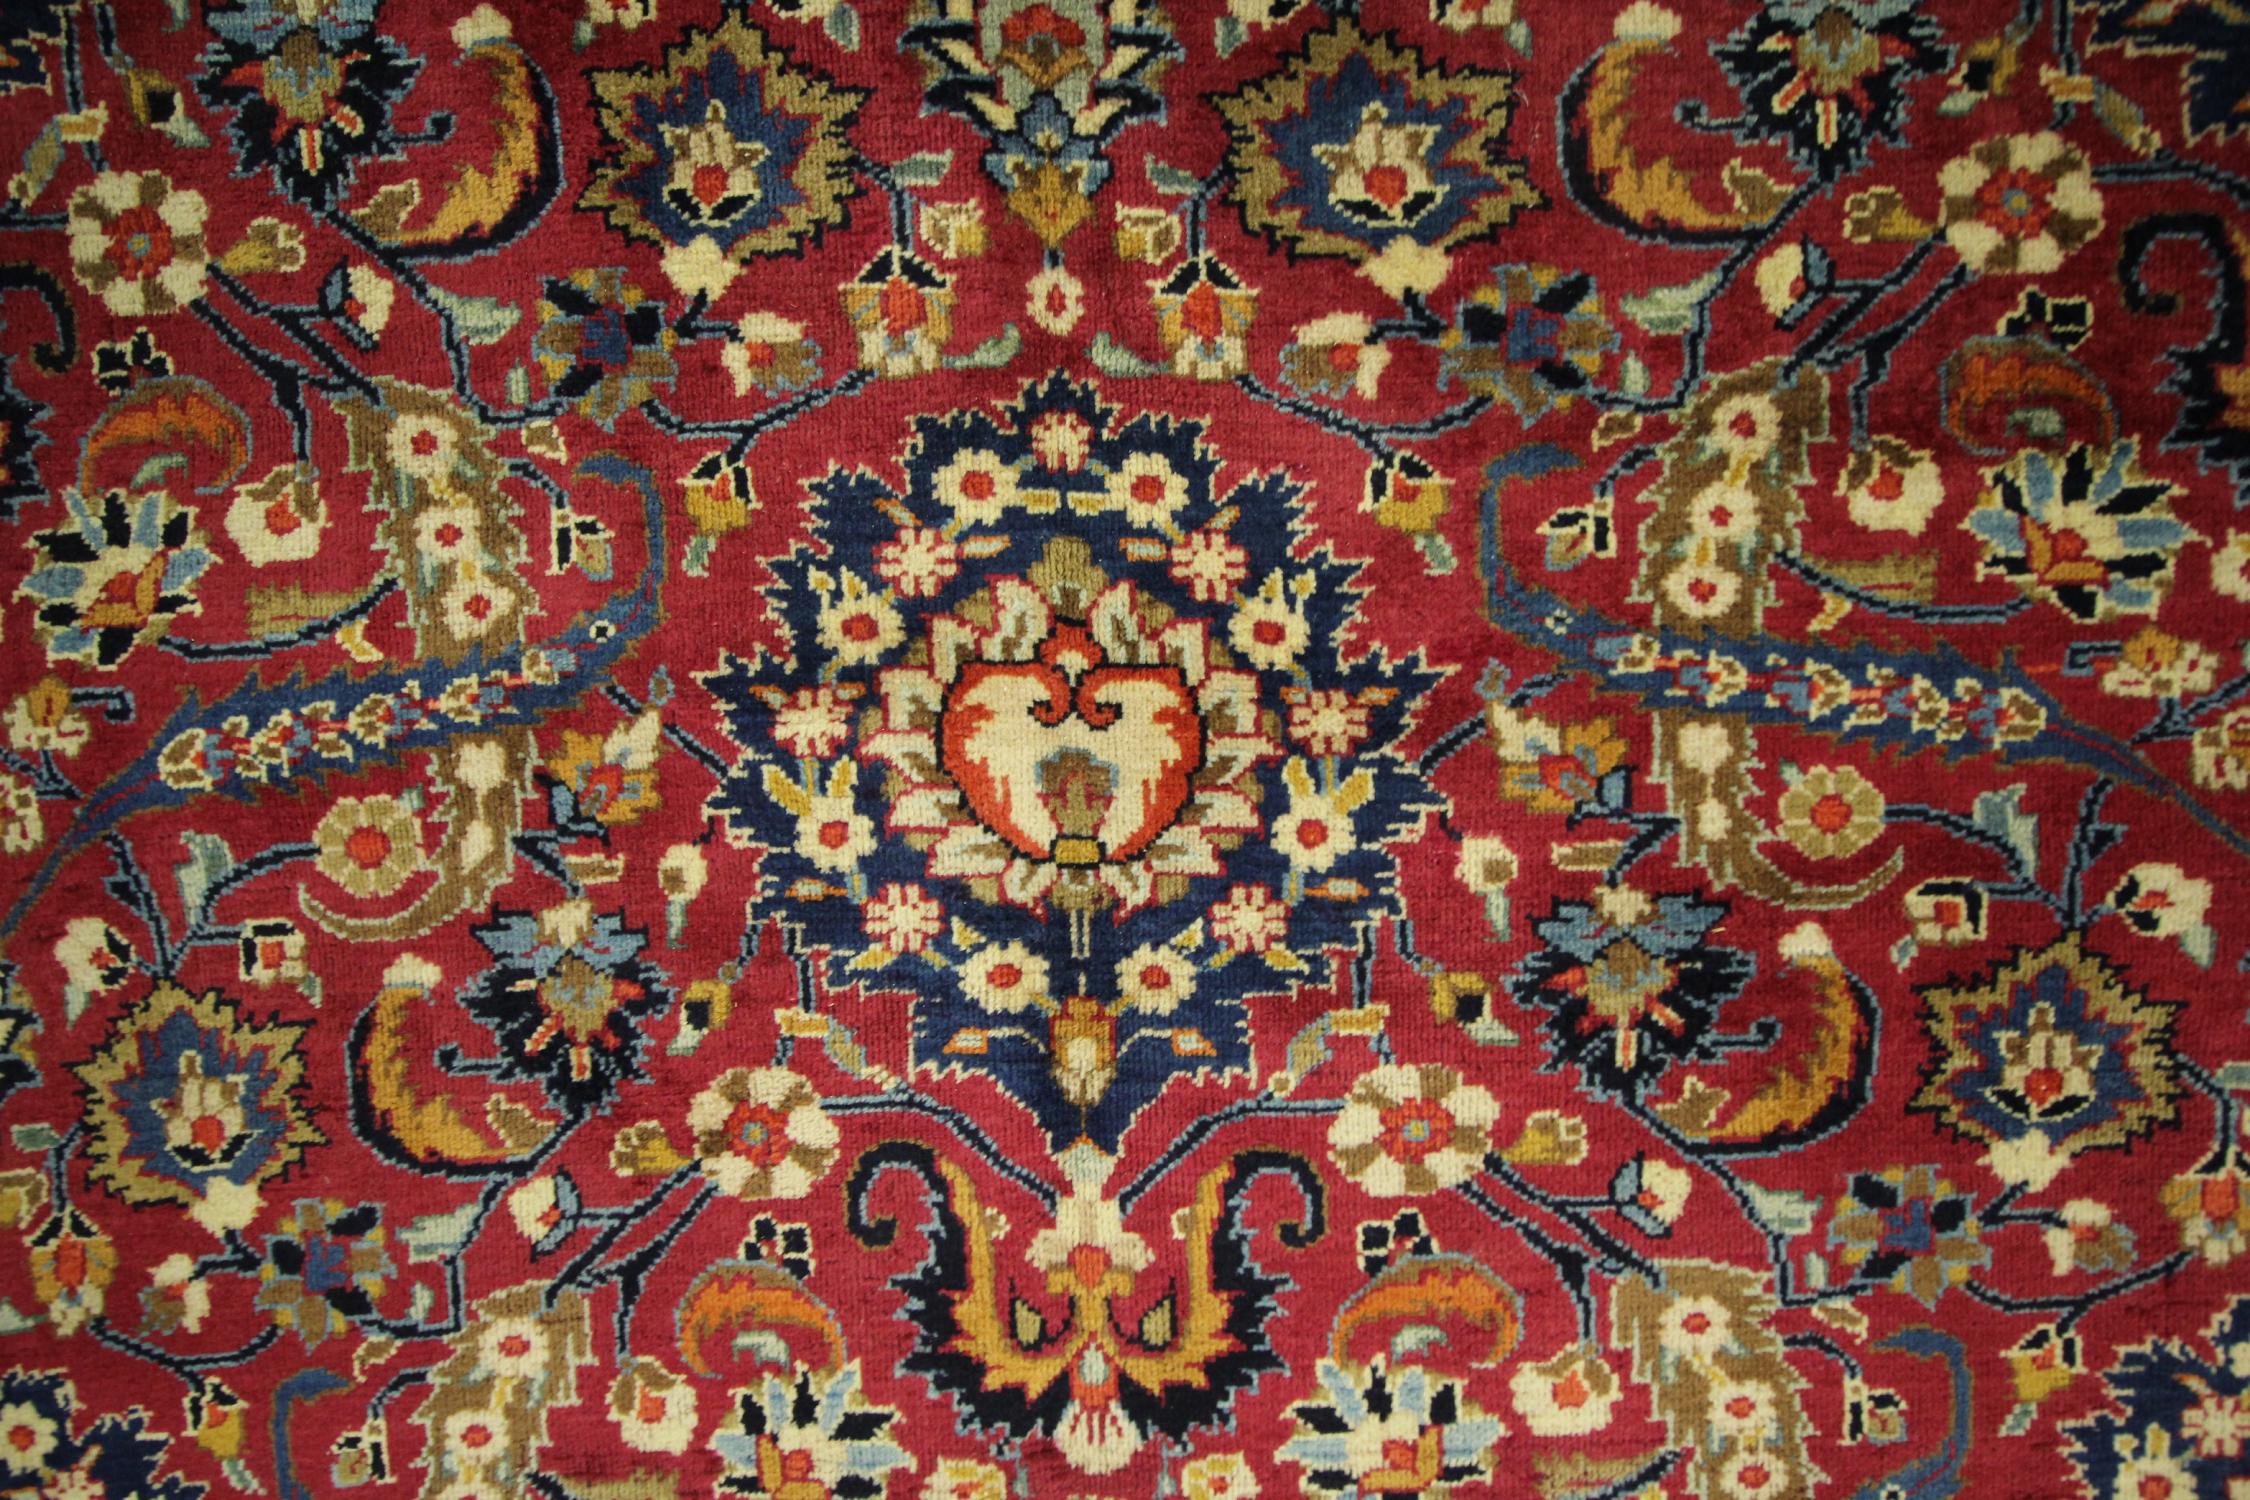 Antique Rugs Crimson Red Handmade Carpet, All over Turkish Rugs for Sale For Sale 4